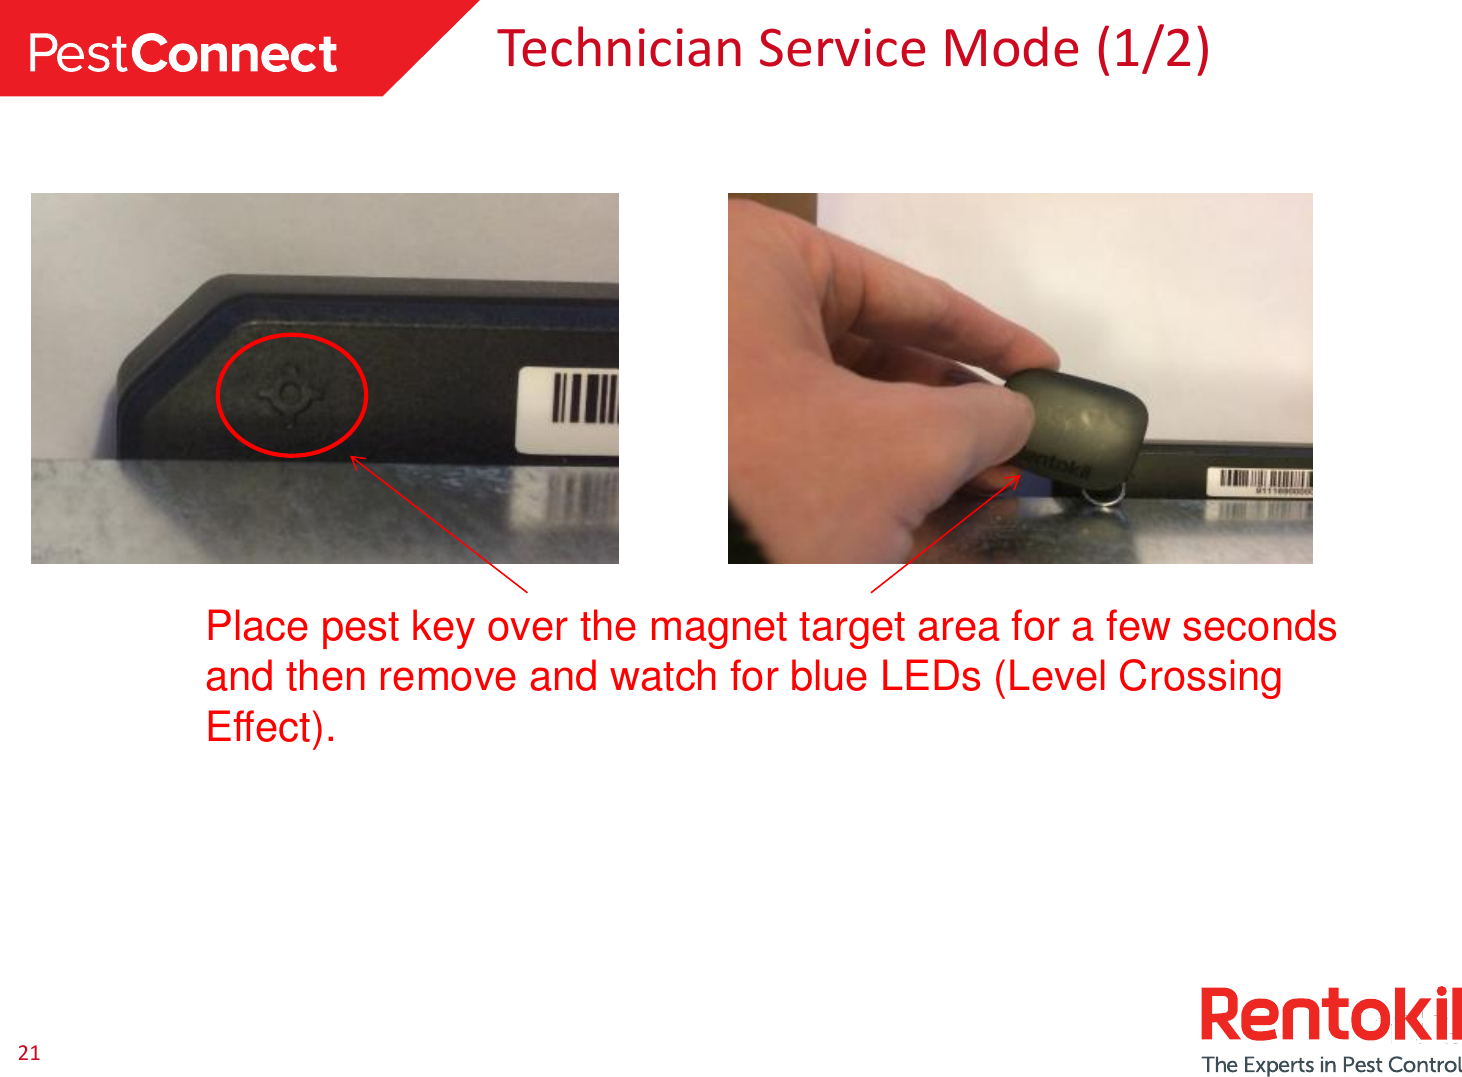 21 Technician Service Mode (1/2)  Place pest key over the magnet target area for a few seconds and then remove and watch for blue LEDs (Level Crossing Effect). 